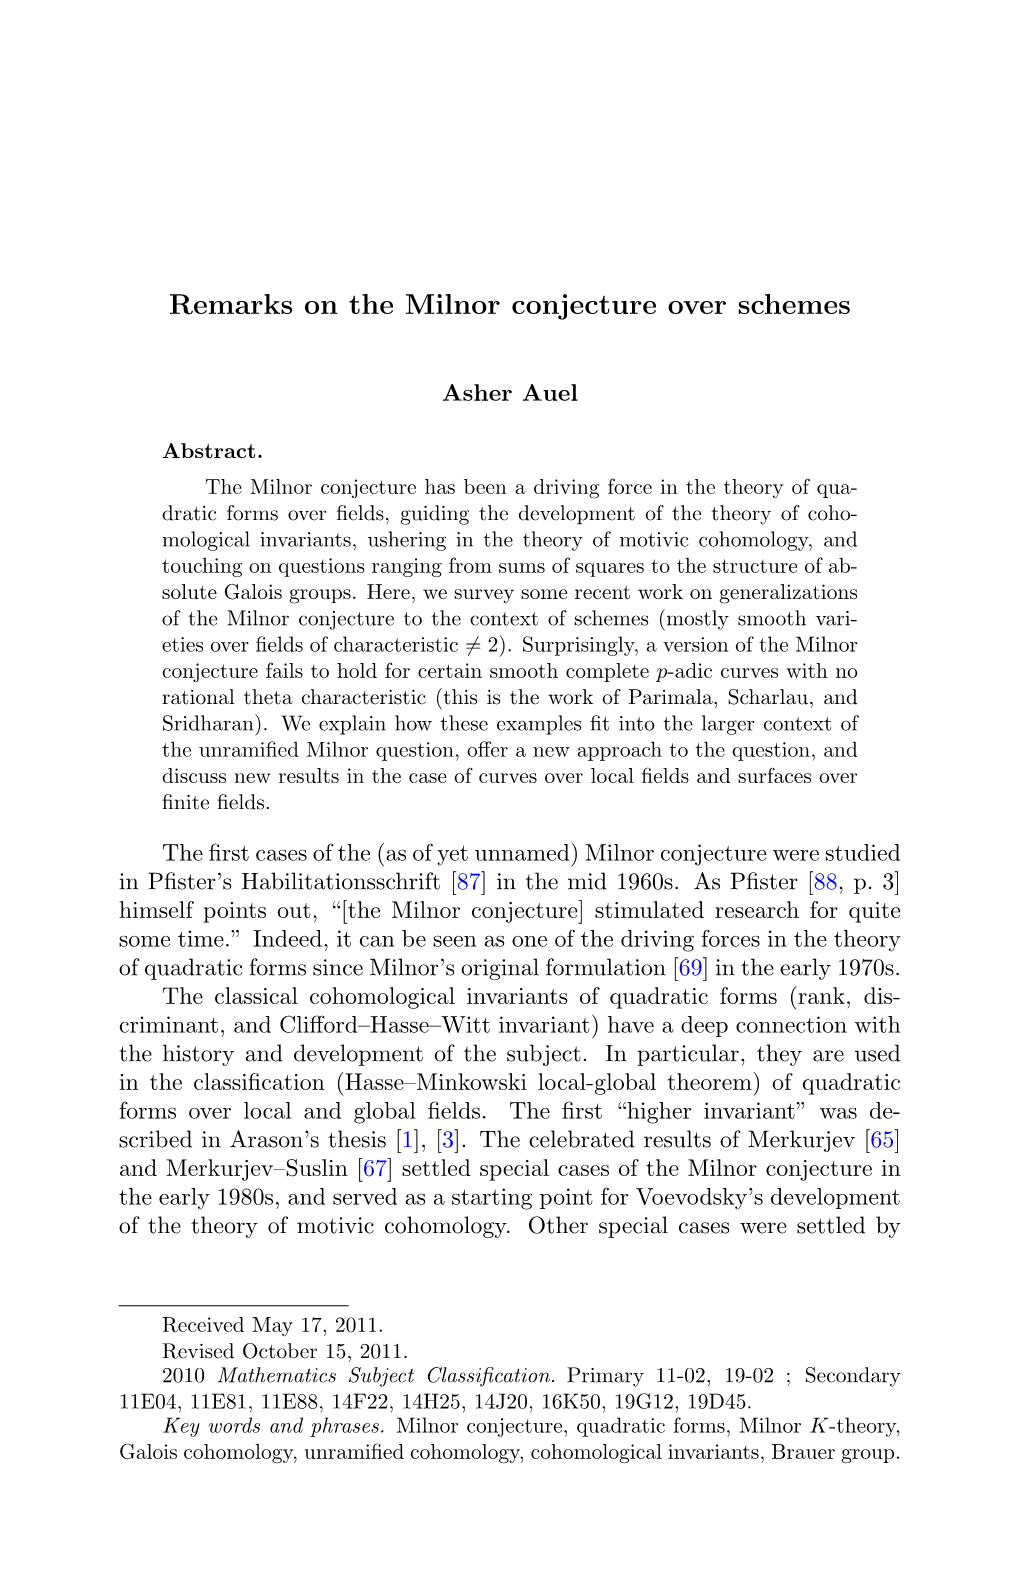 Remarks on the Milnor Conjecture Over Schemes